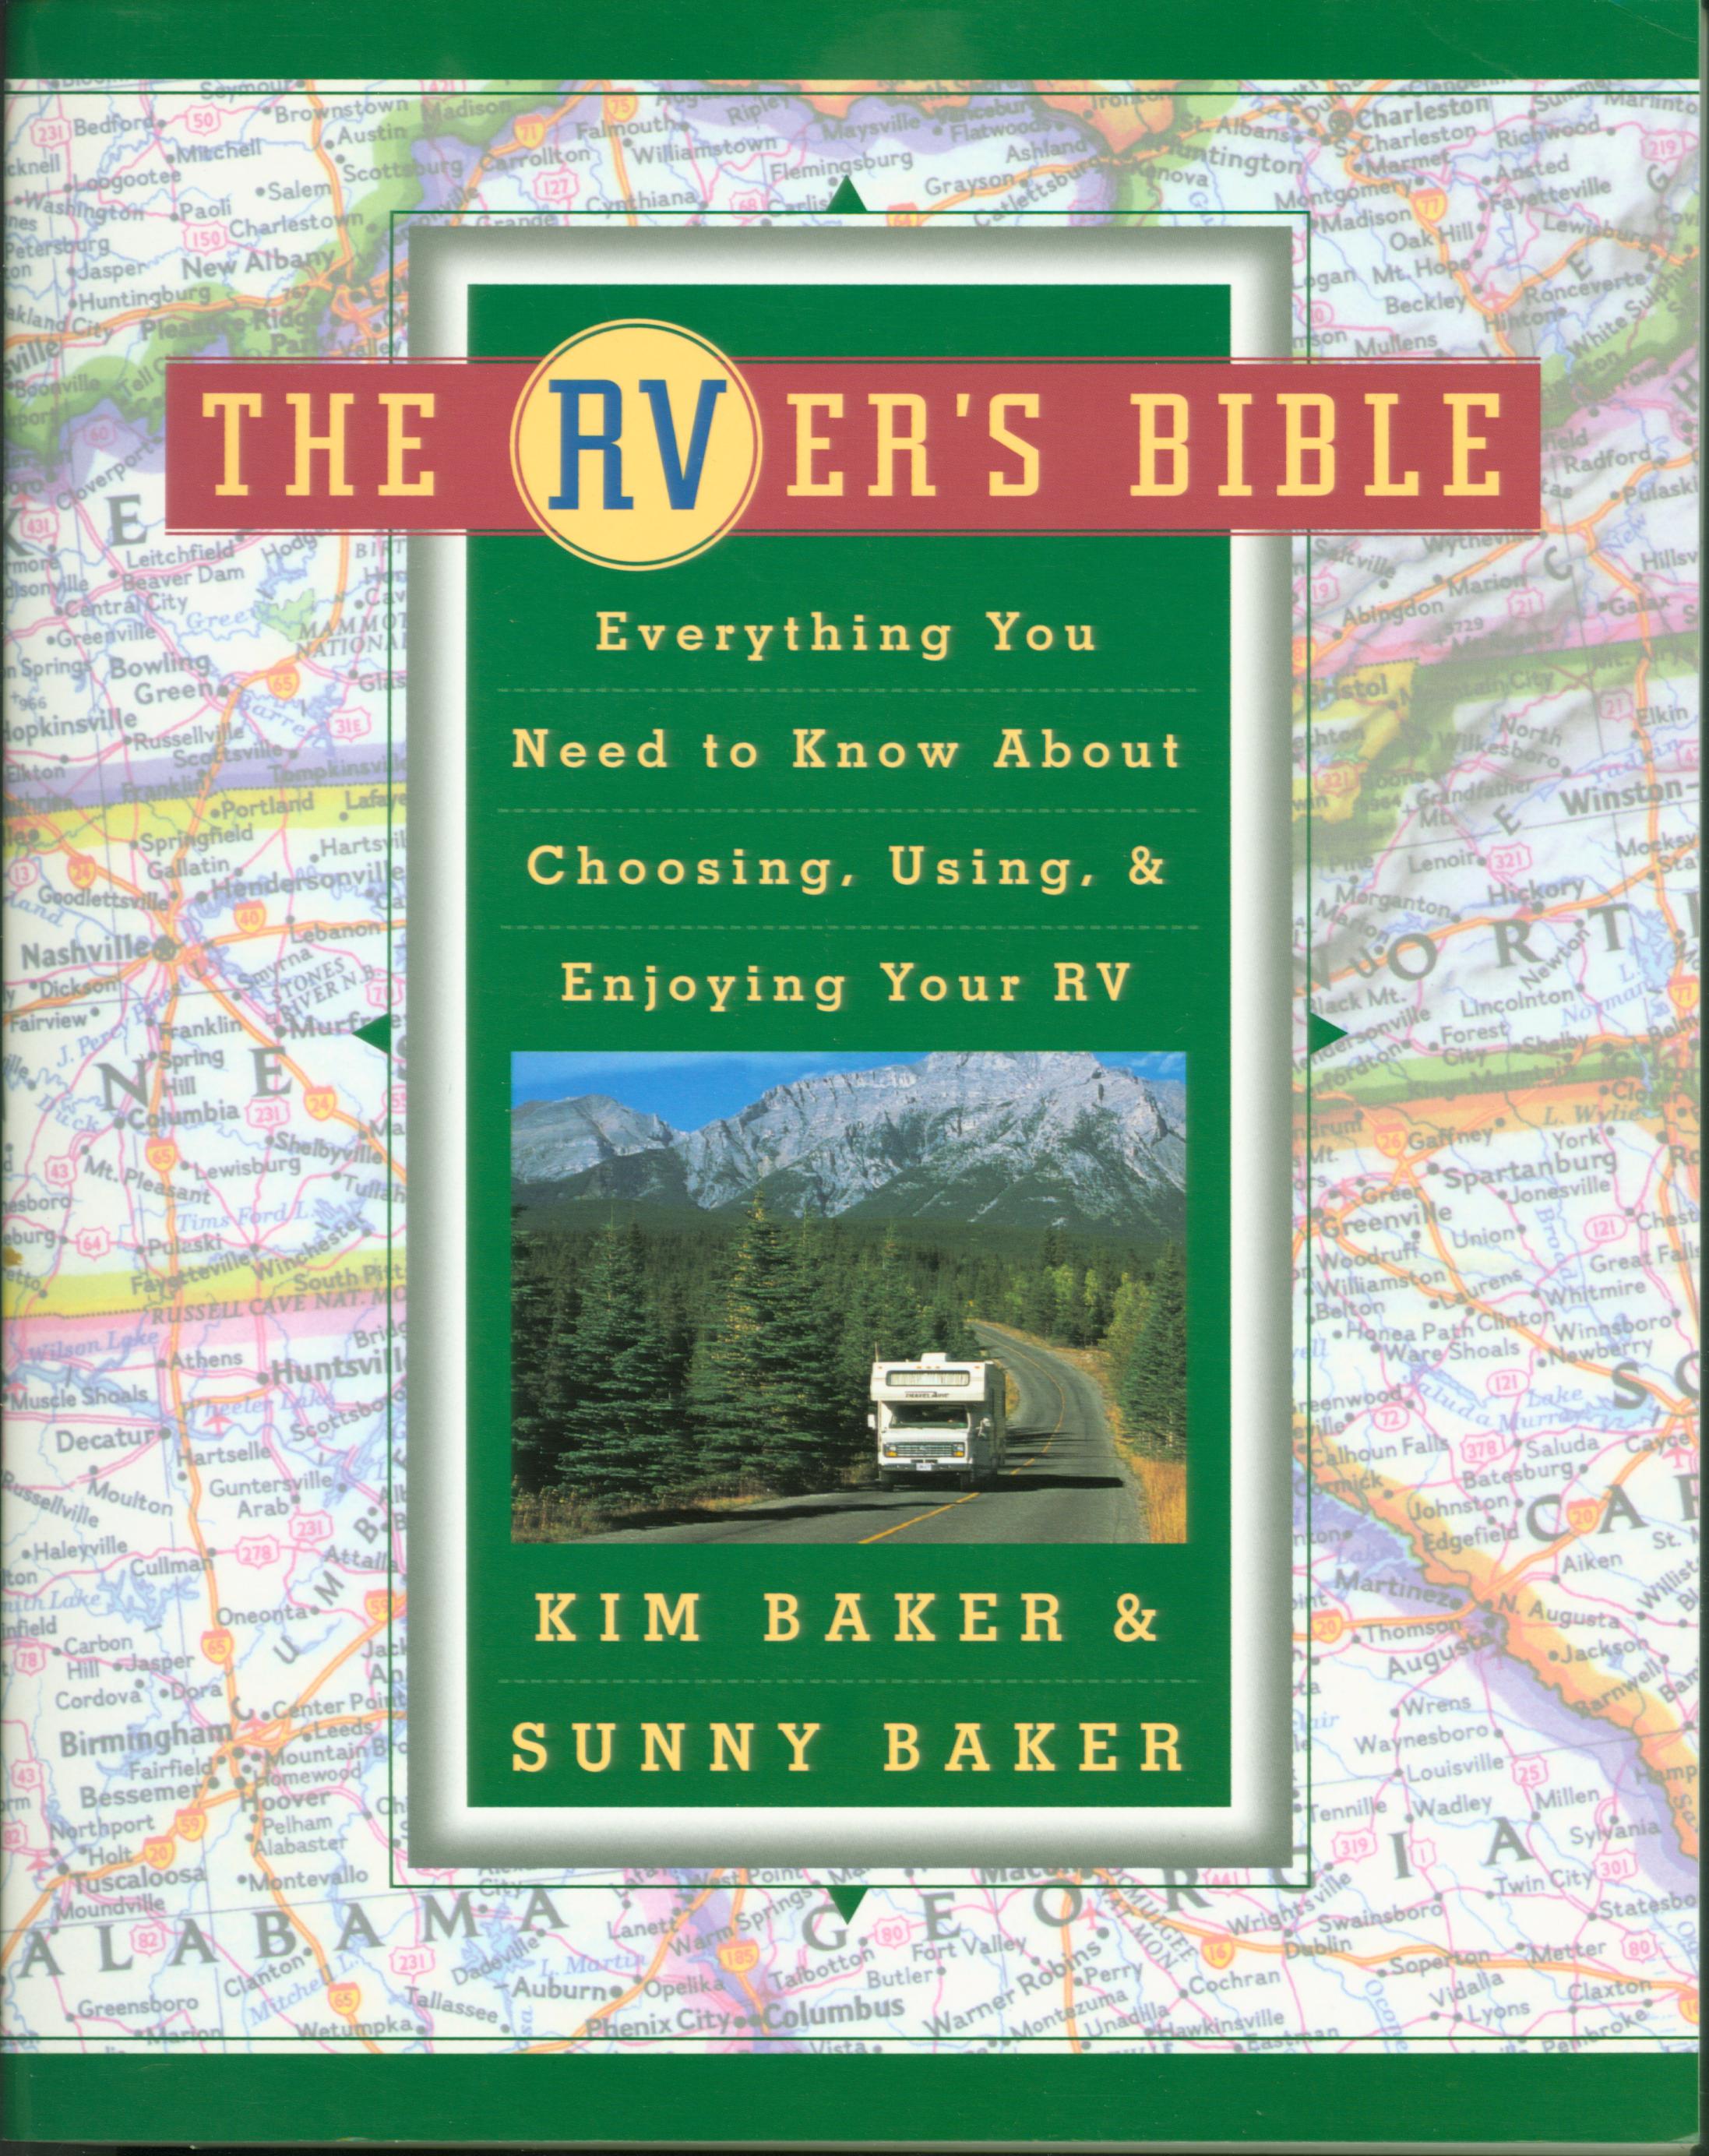 THE RVer's BIBLE: everythihg you need to know about choosing, using, & enjoying your RV. 